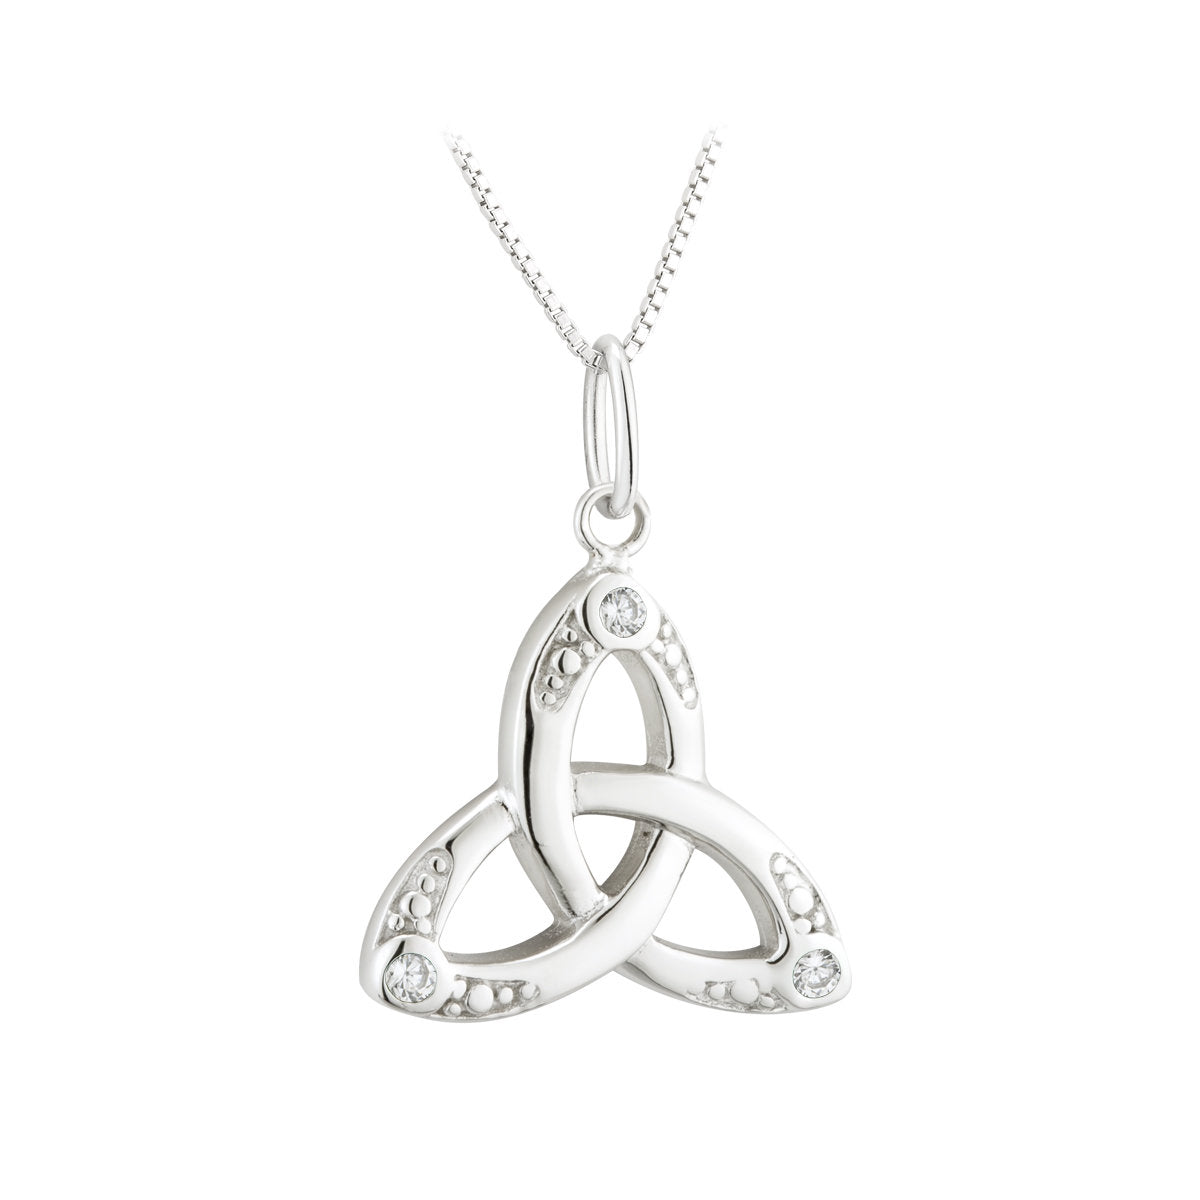 Sterling Silver Trinity Knot Necklace with Crystals